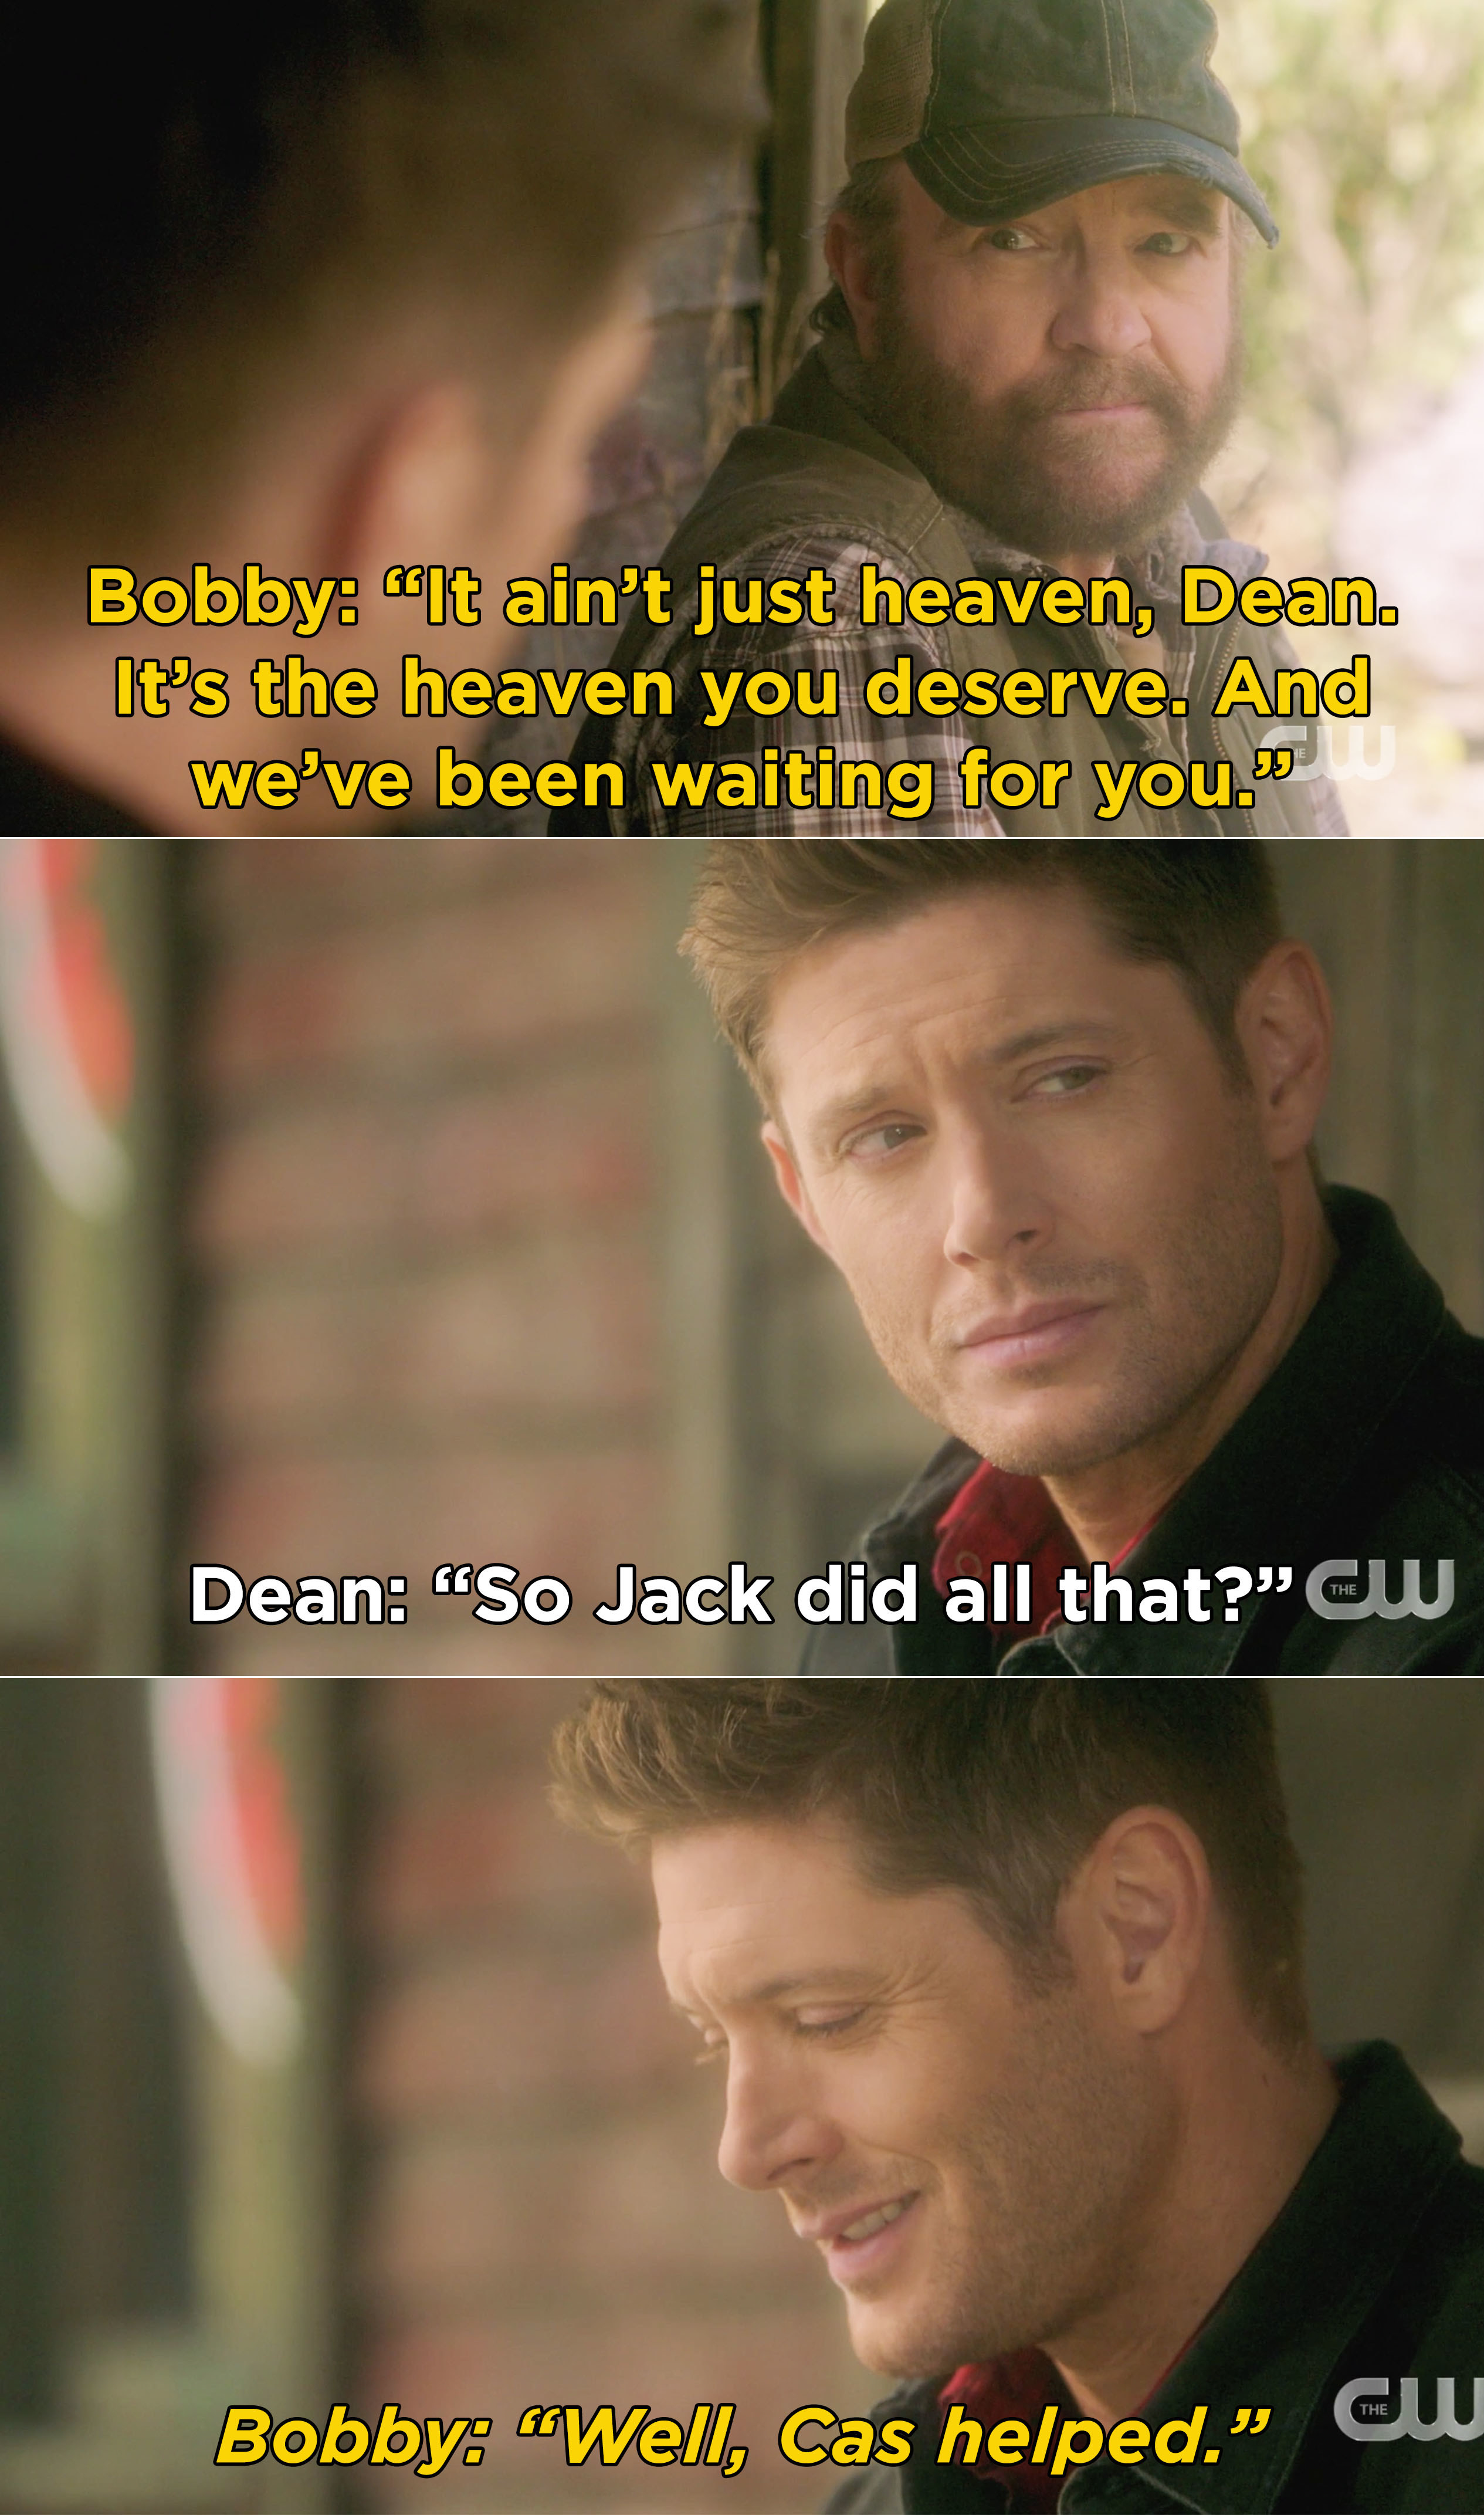 Bobby telling Dean that this is the heaven he deserves and that Cas helped Jack build it